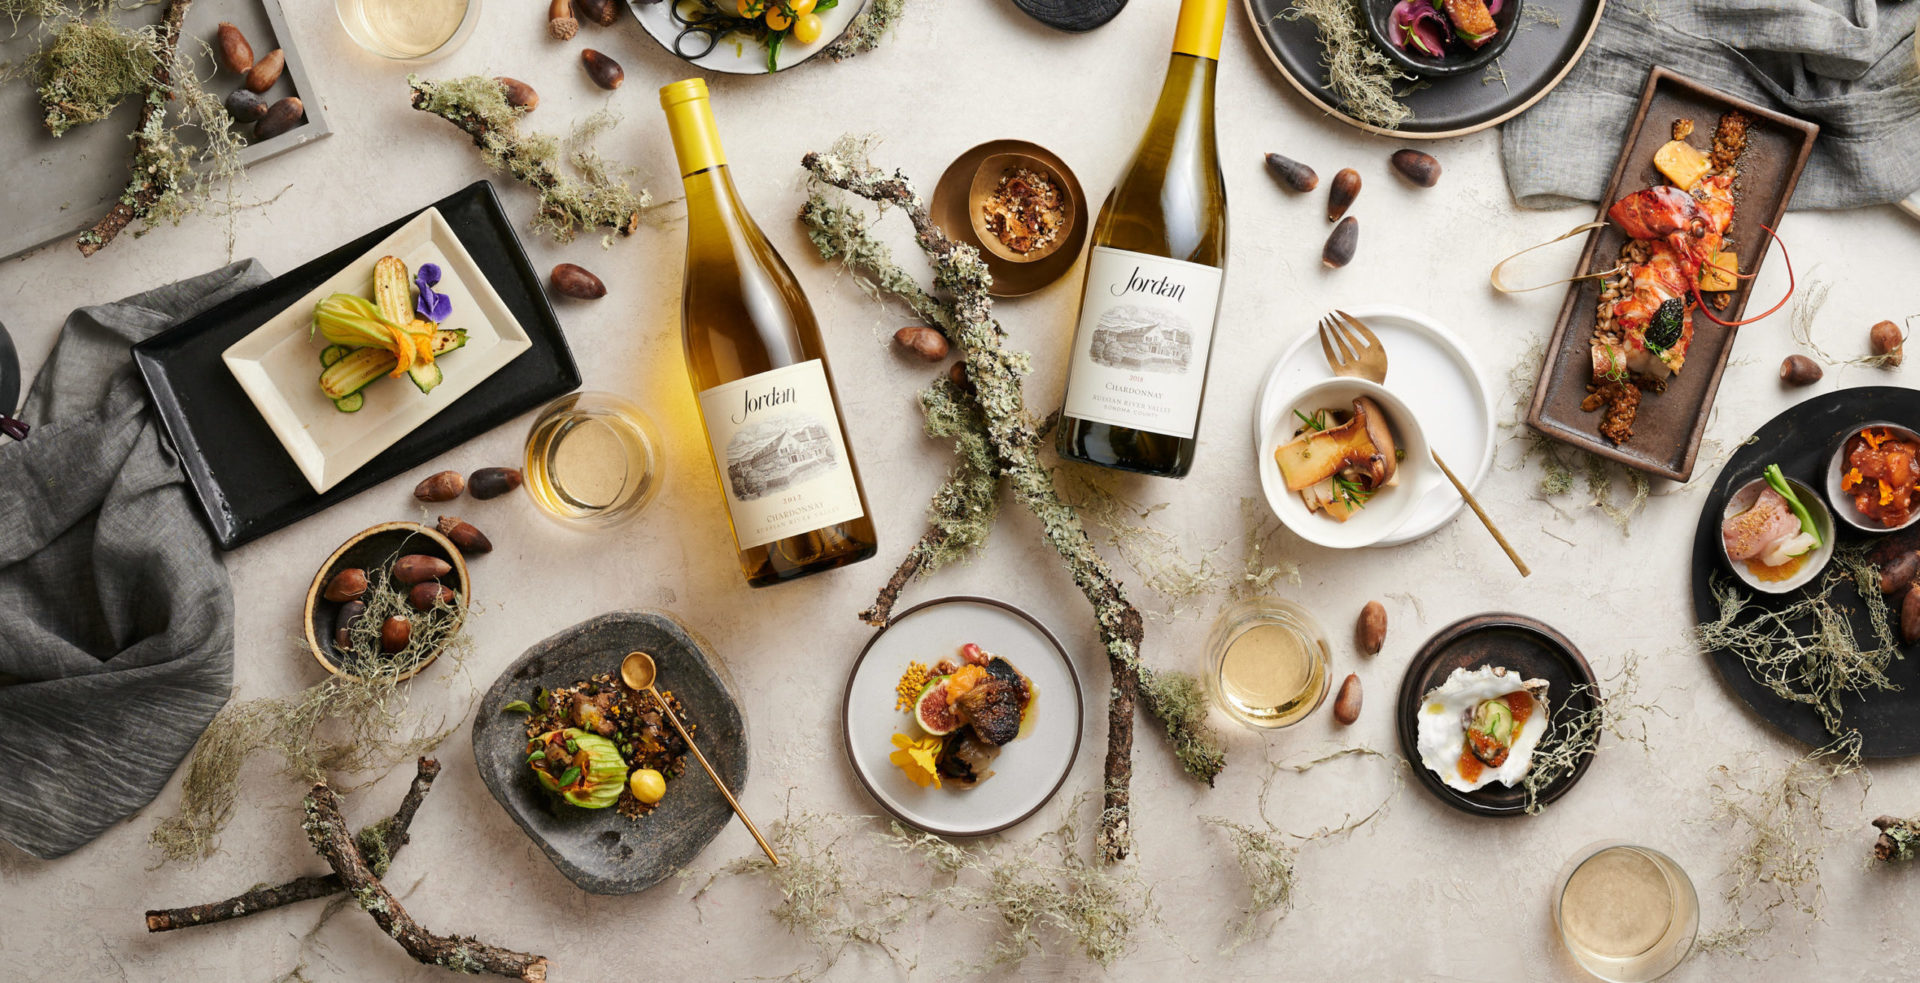 Bottles of Jordan Chardonnay on a tabletop with food, linens, branches and acorns